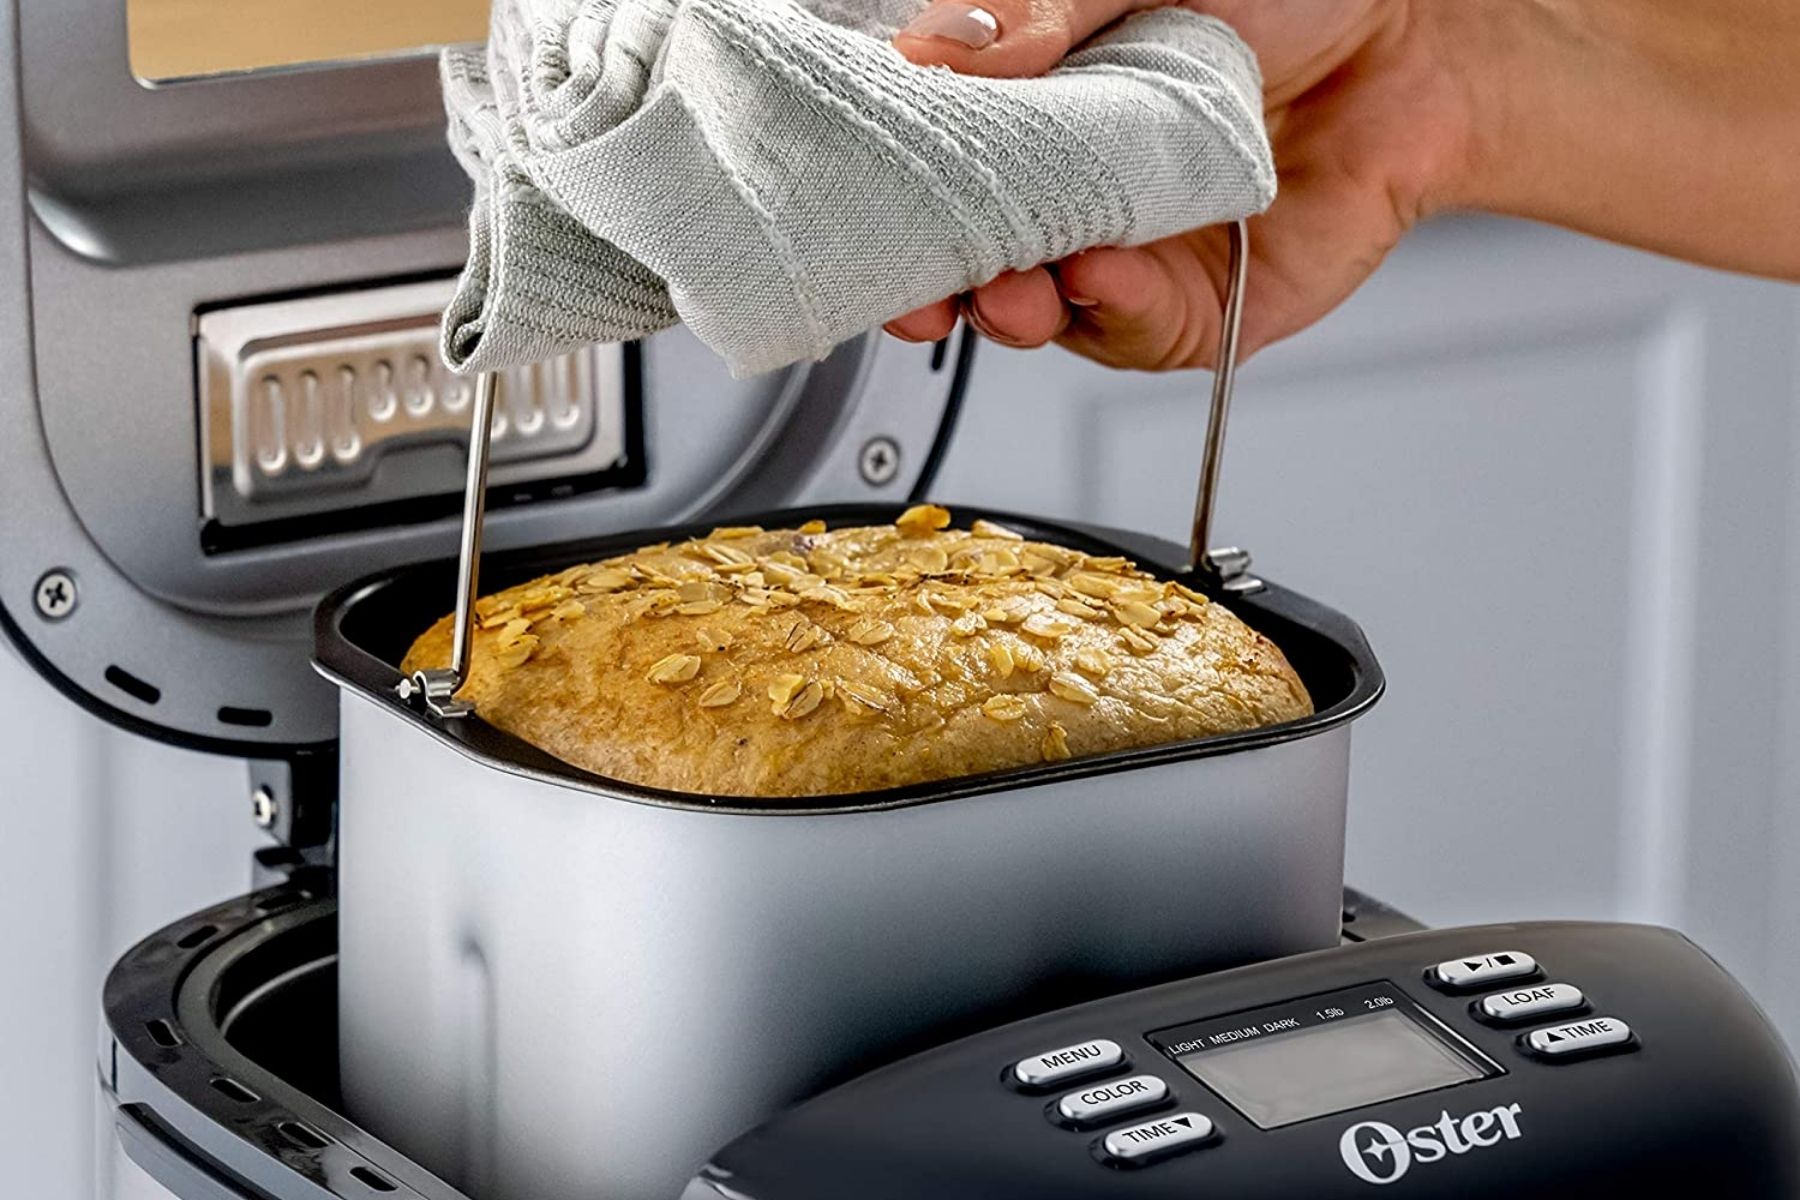 On Sale Bread Makers - Bed Bath & Beyond